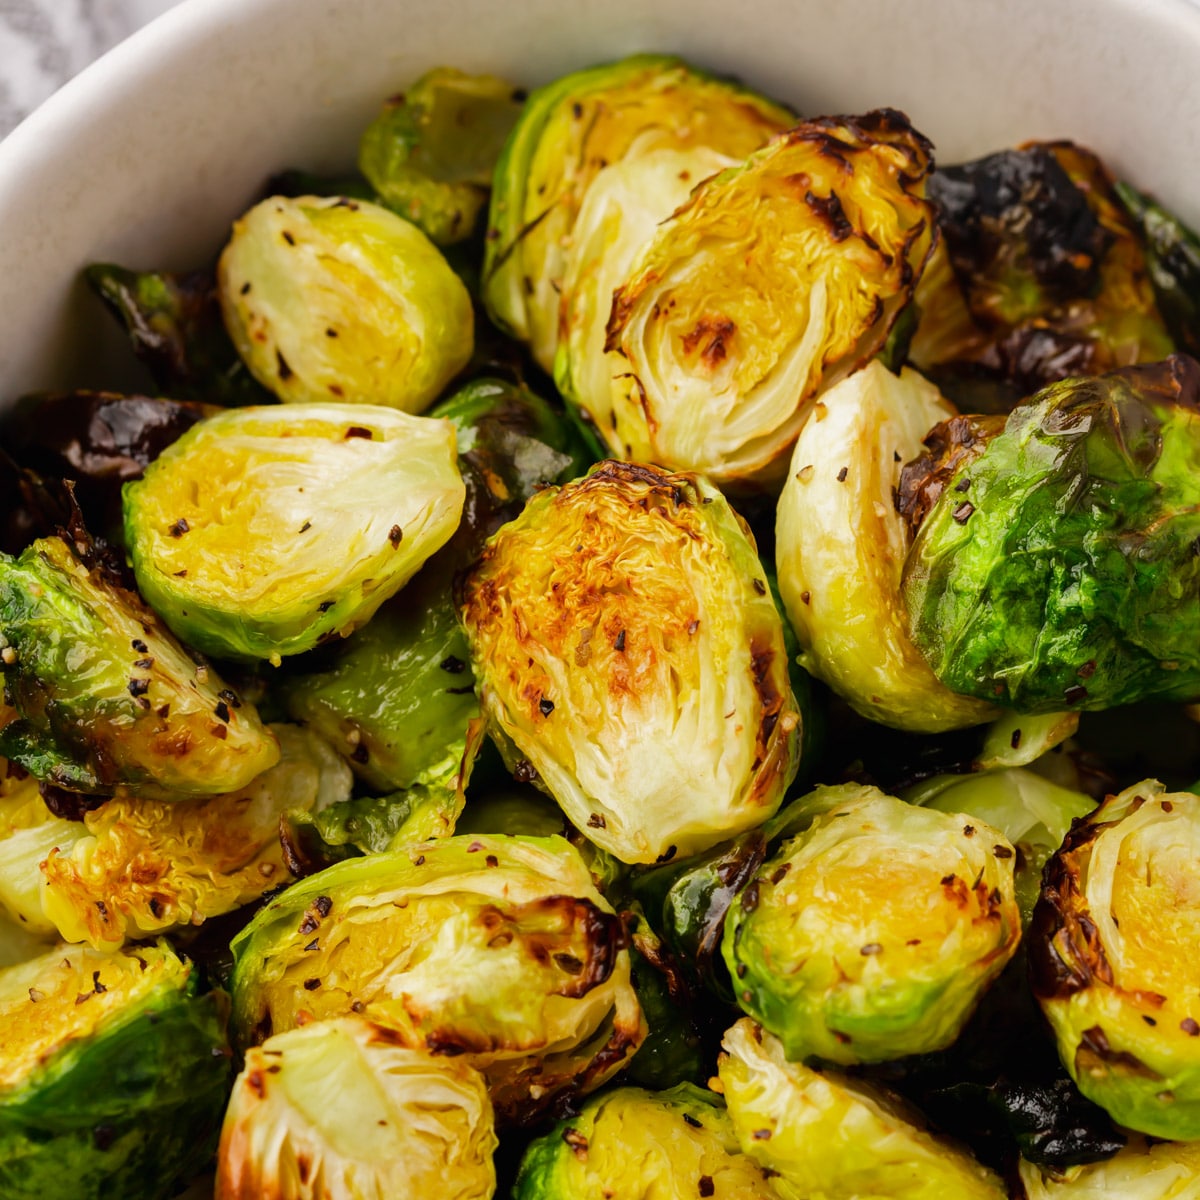 15-Minute Crispy Air Fryer Brussel Sprouts (+ Video!)